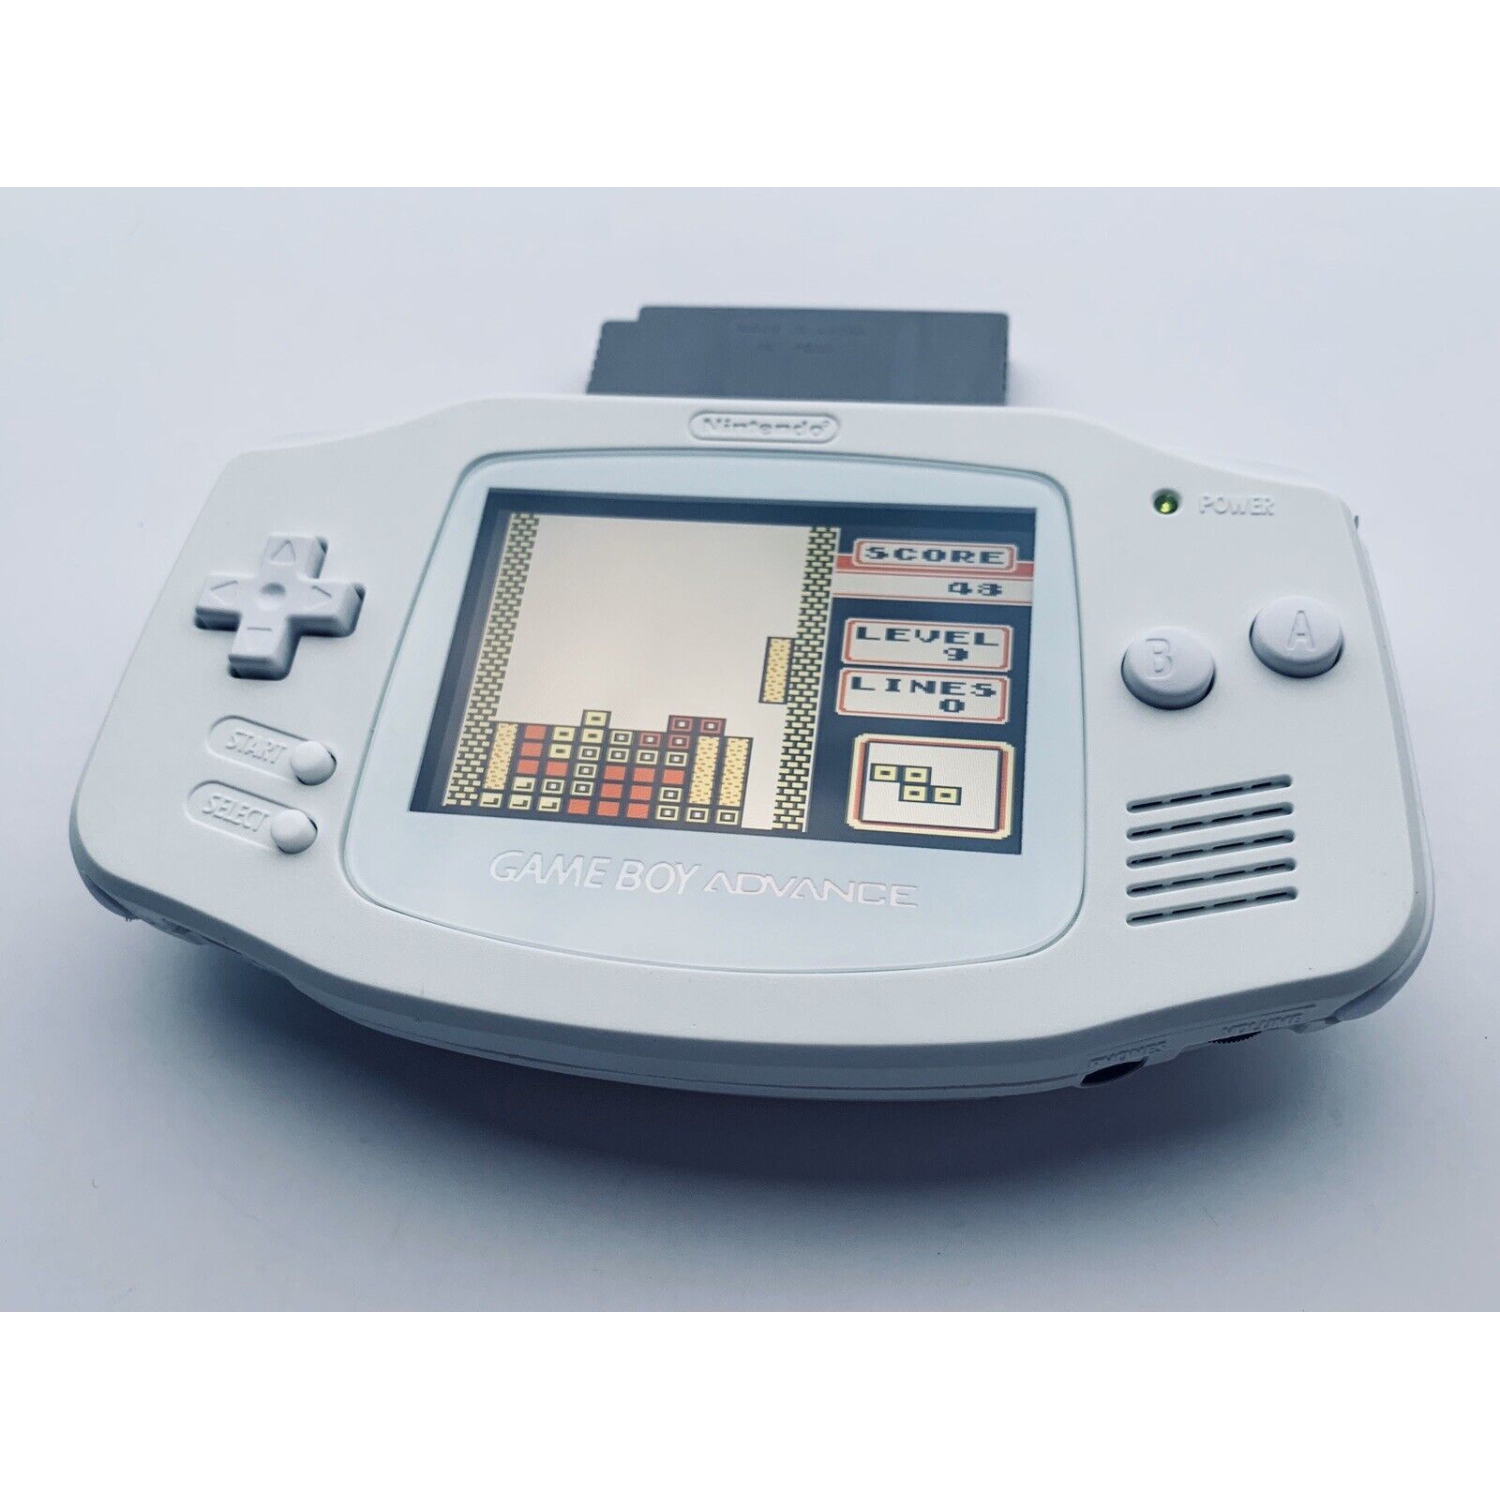 Authentic Refurbished Excellent Nintendo Gameboy Advance GBA White Handheld Gaming BACKLIT IPS